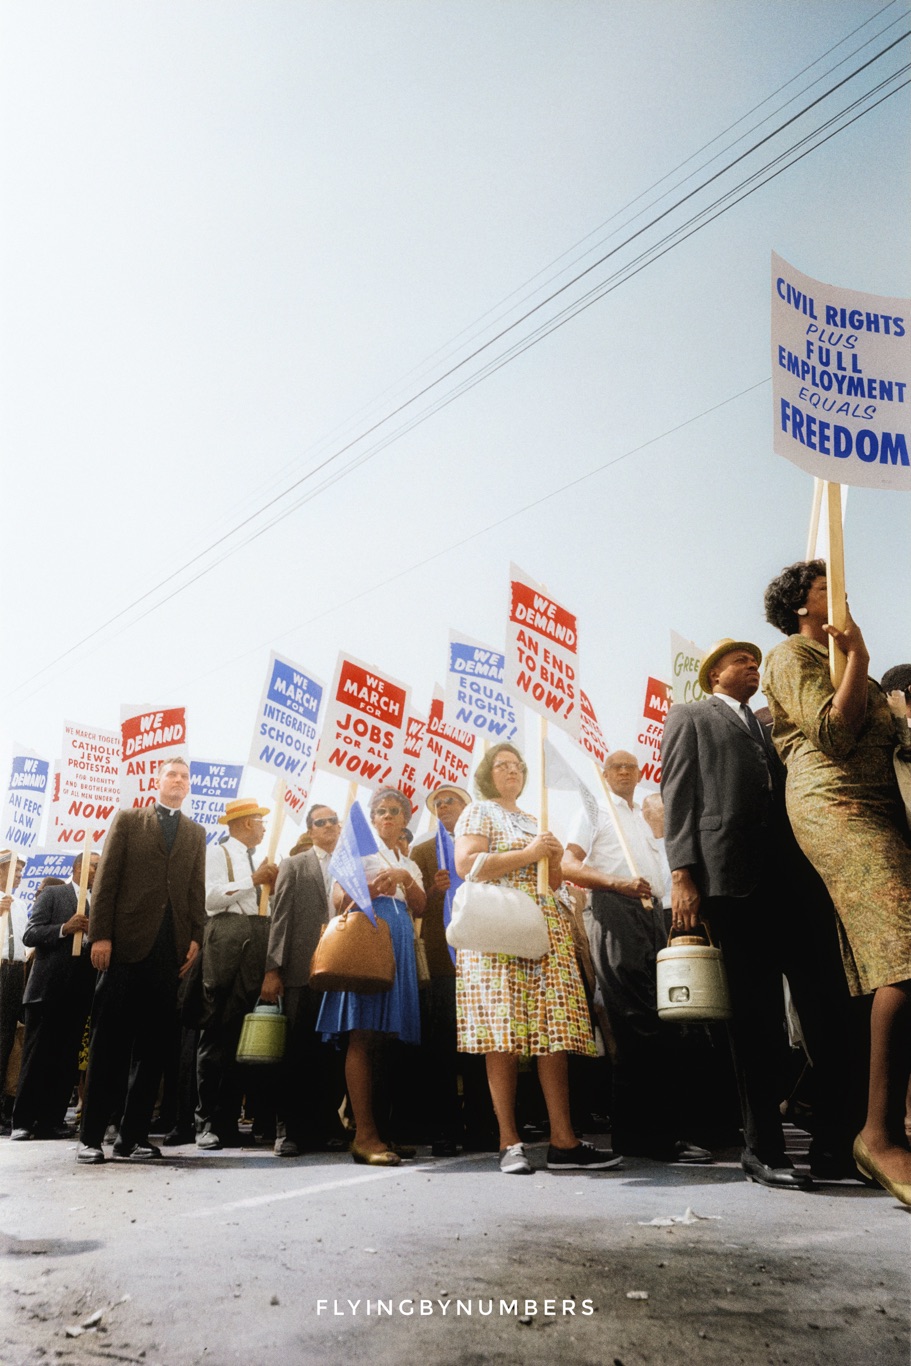 Women and men marching for equality in America during the 1960s